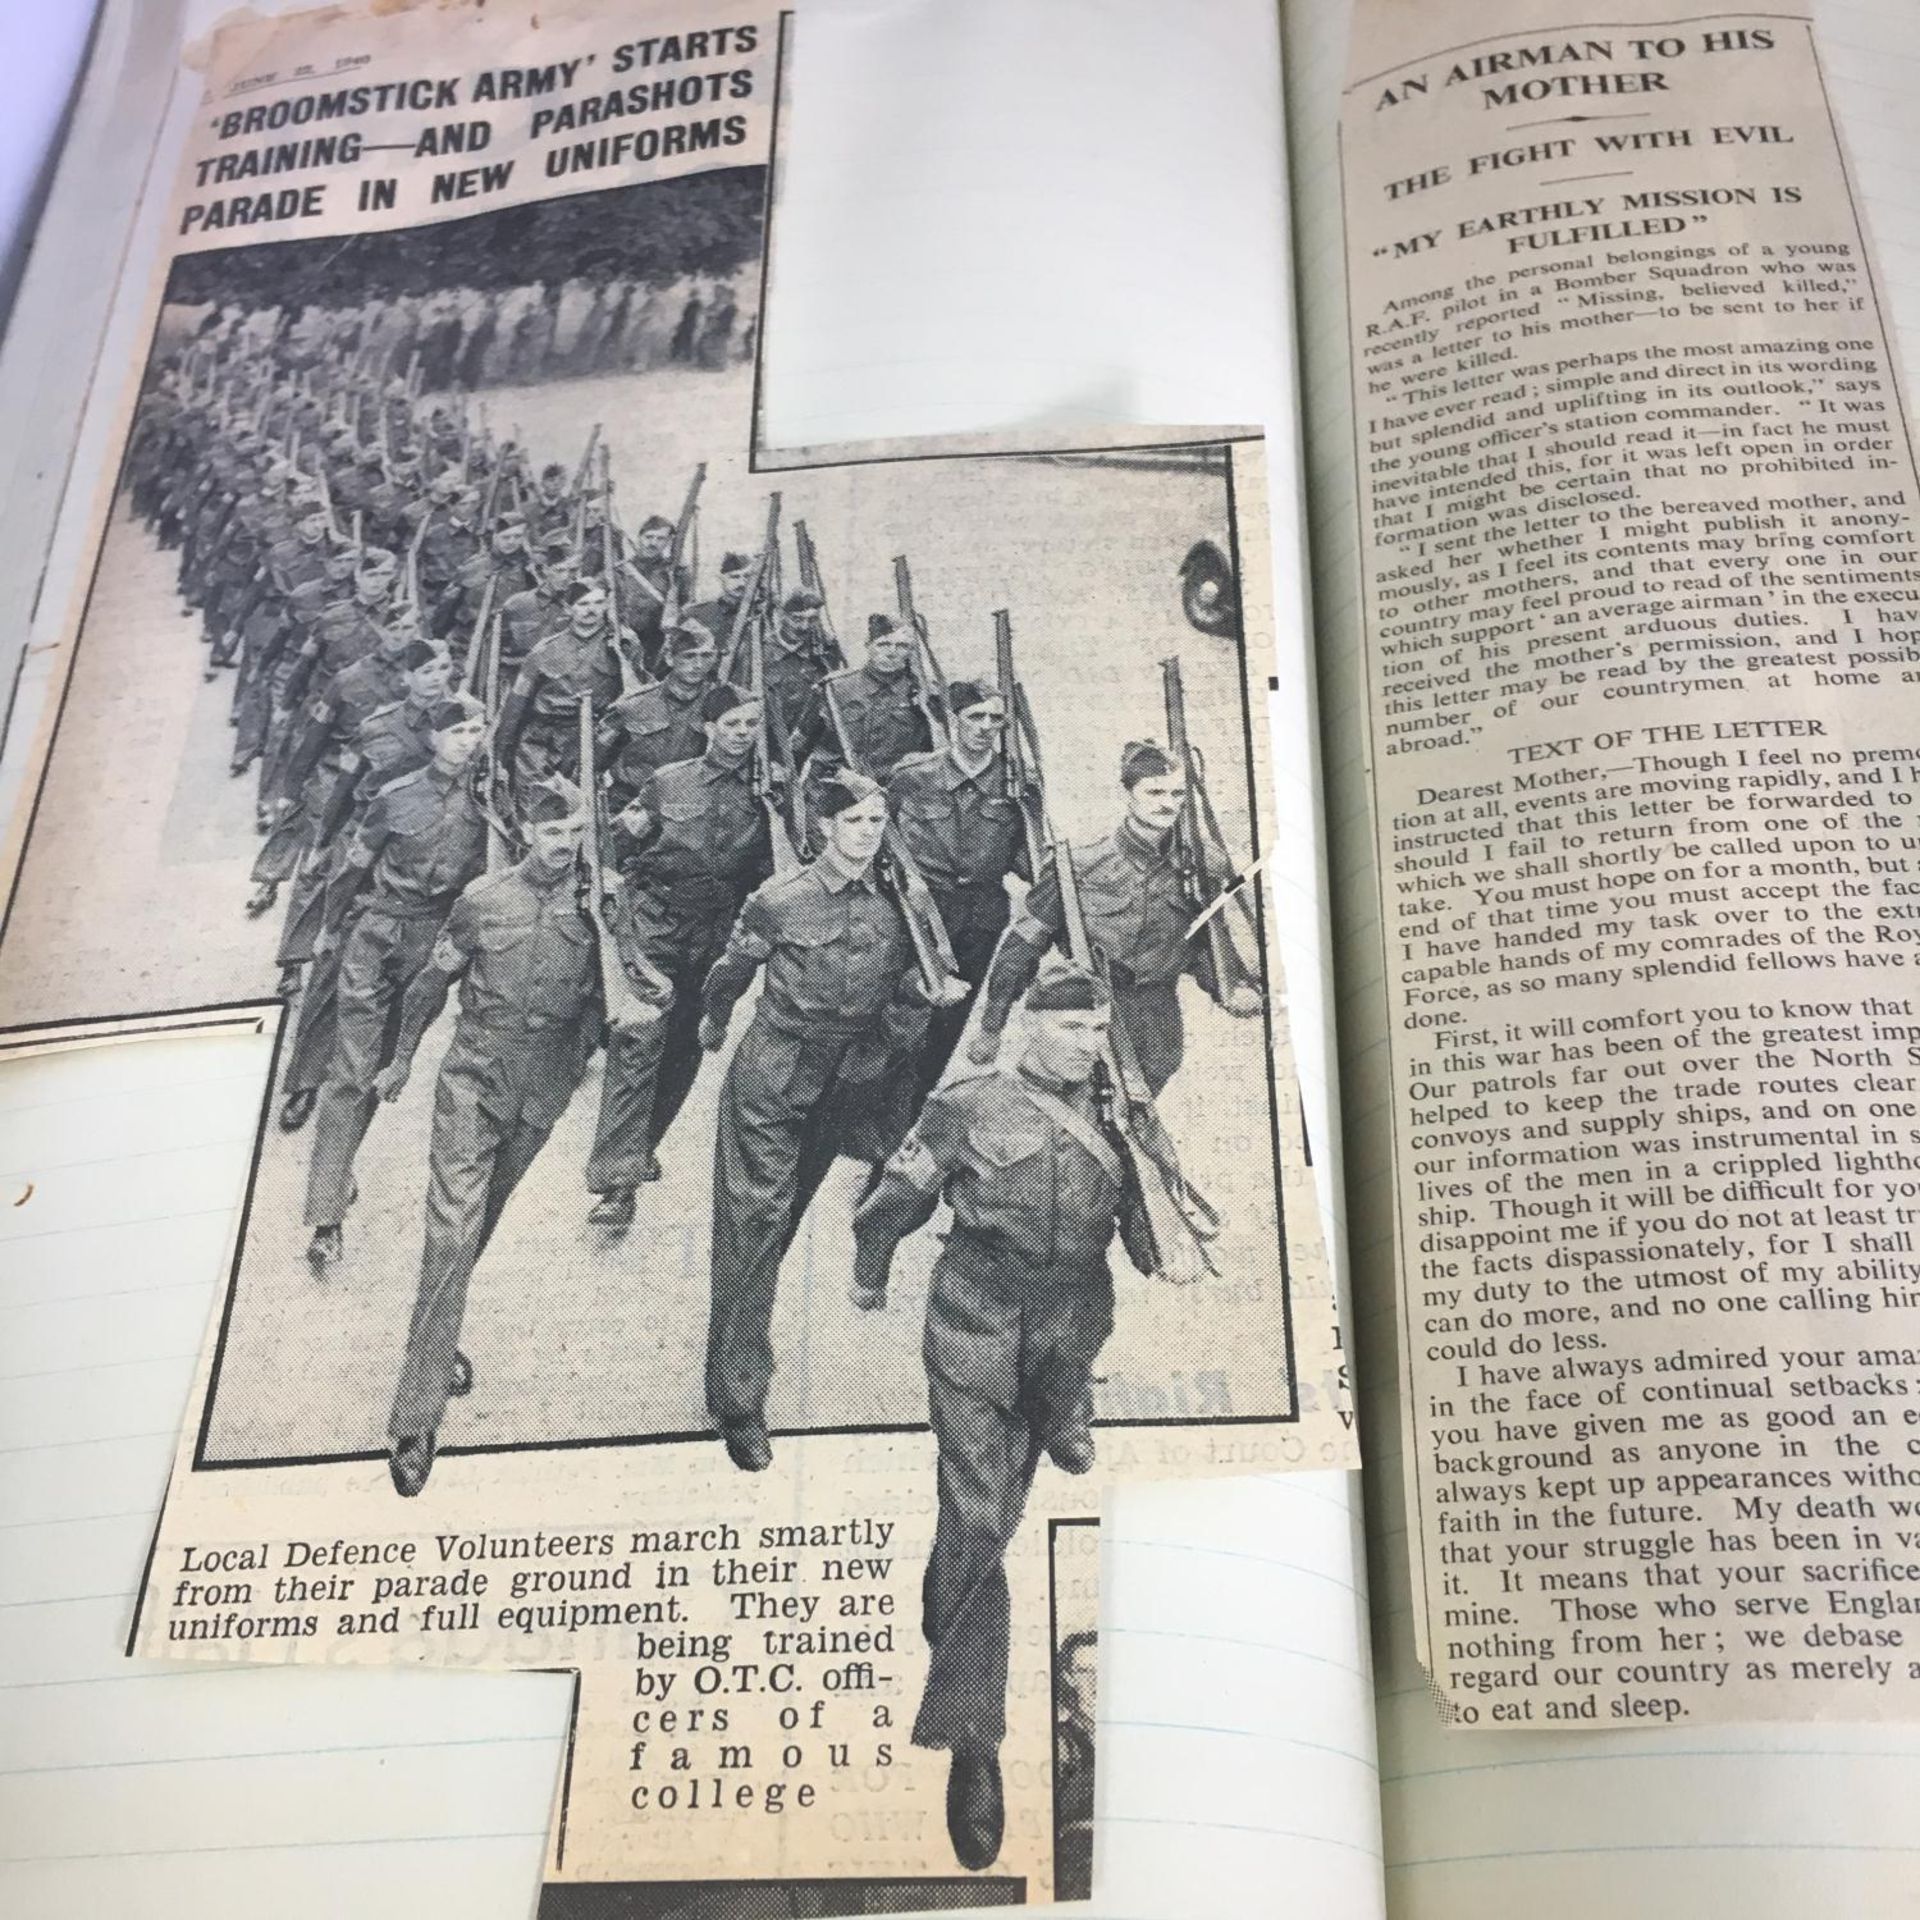 WWII HOME GUARD 1940 NEWS CUTTINGS. Scrapbook containing news cuttings from 1940 all relating to the - Image 4 of 4